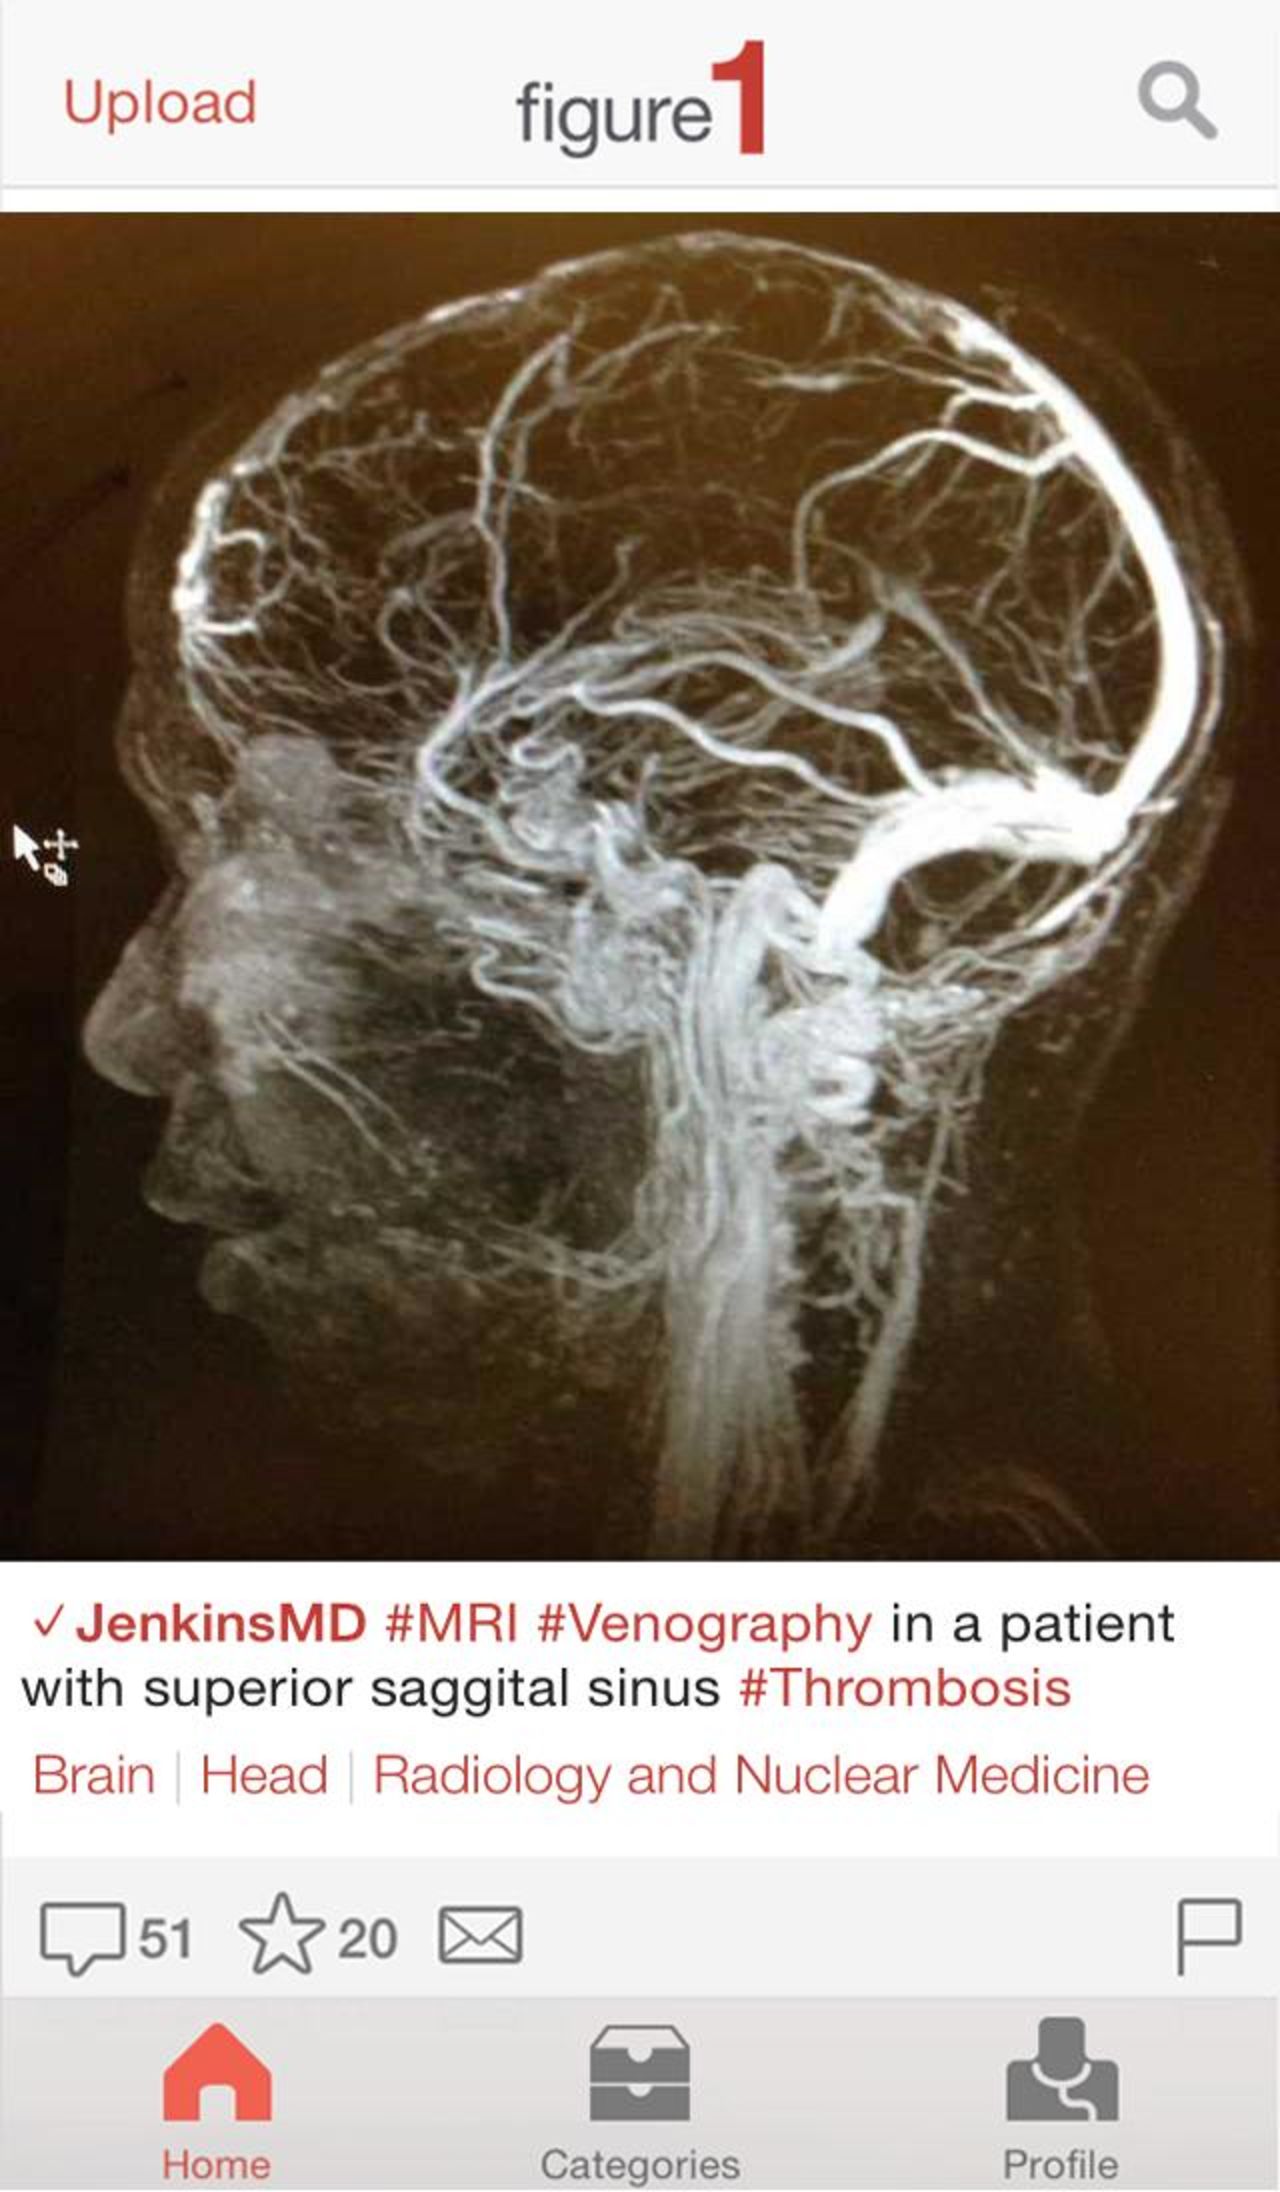 When users upload an image, any identifying information is removed before the image is posted. Here, an X-ray of a patient's veins, known as a venogram, is uploaded for consultation.